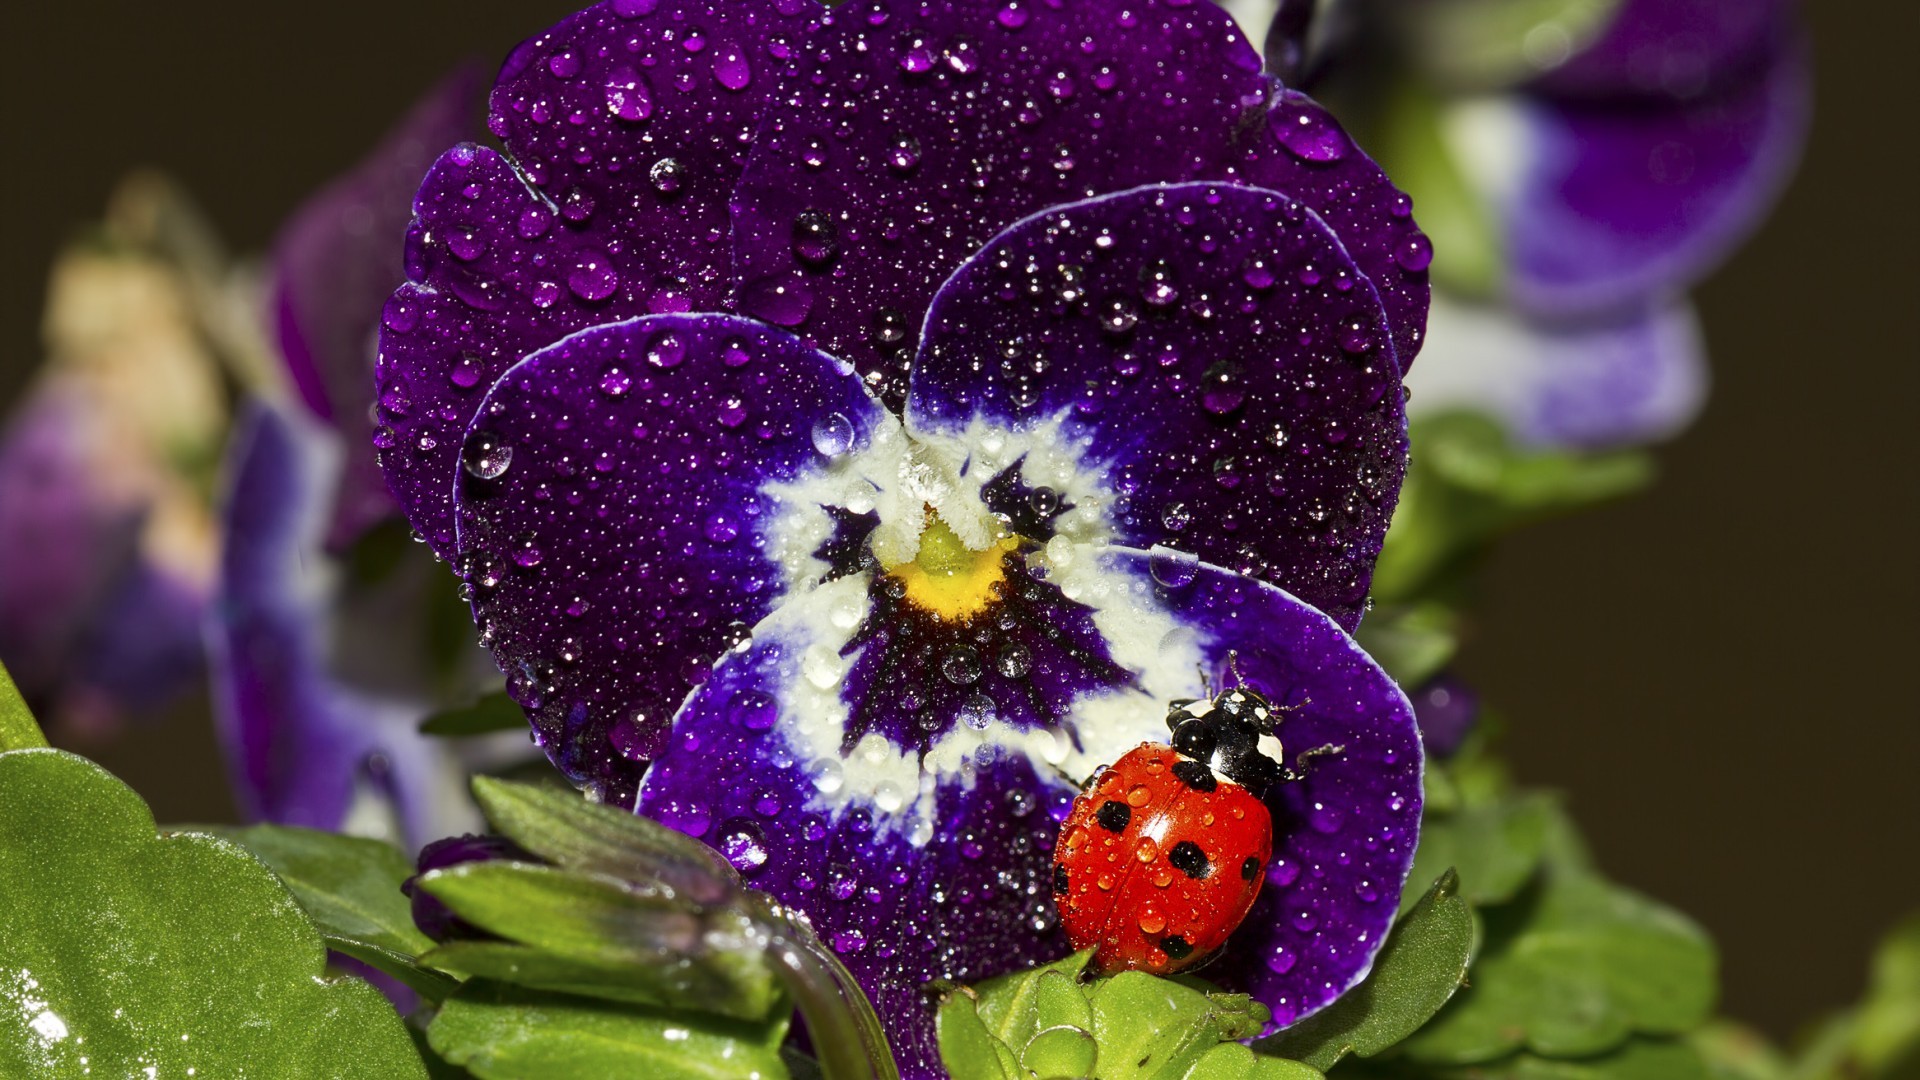 General 1920x1080 nature ladybugs insect macro flowers water drops purple flowers pansies animals plants